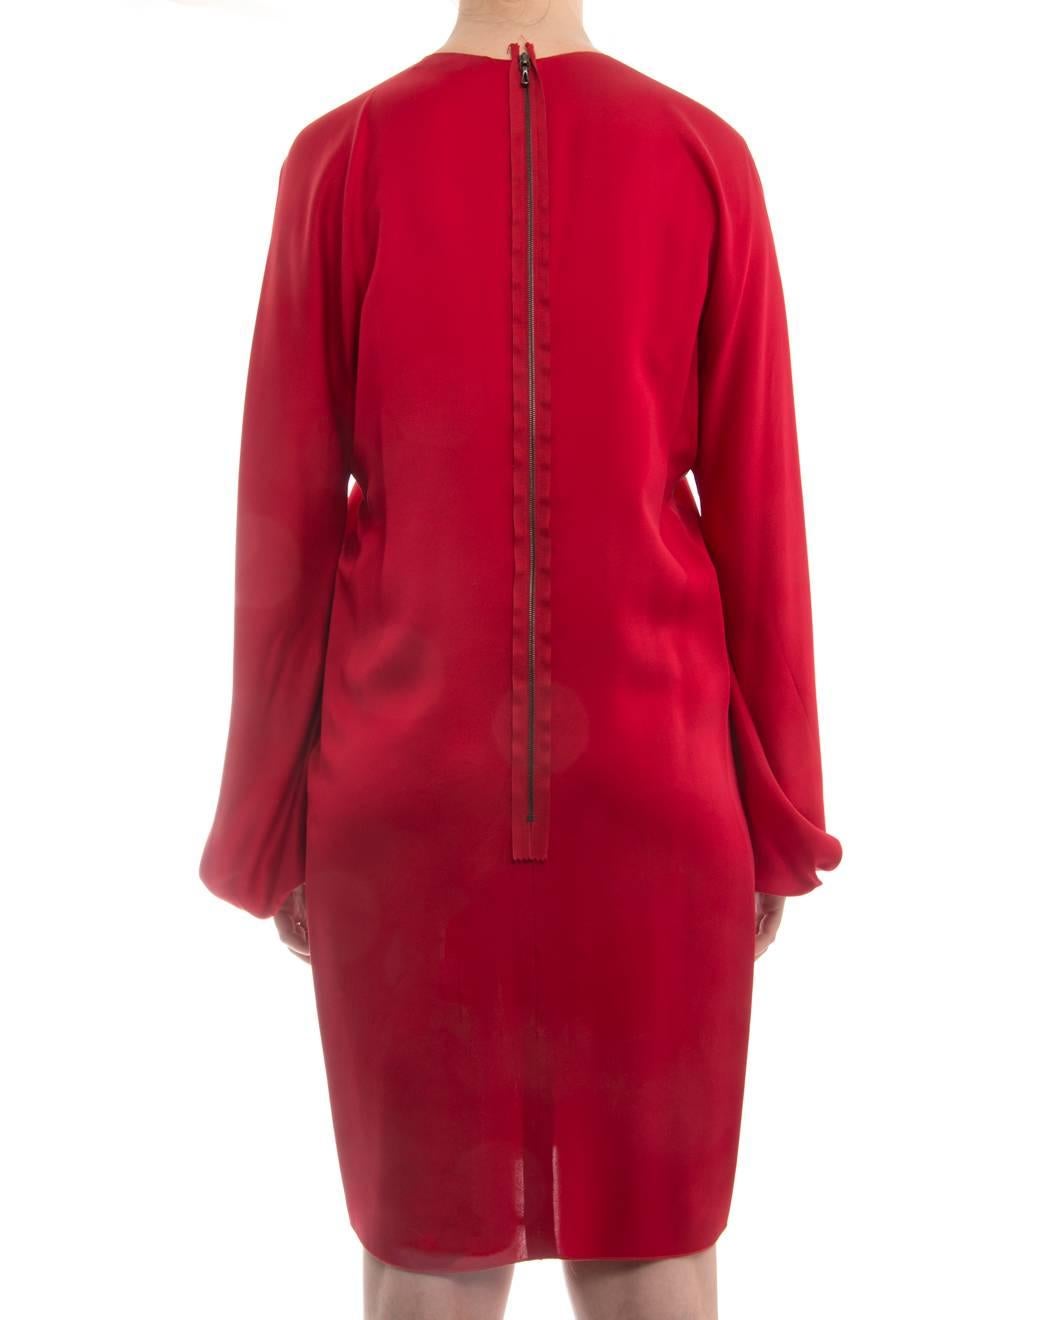 Lanvin Winter 2017 Red Dress with Gold Tone Neck Band . Features a centre back exposed zipper and square neckline. Marked size FR 40 (fits USA 6). Garment measures 36” bust and is recommended to be worn by 34” bust person for ease of movement. 